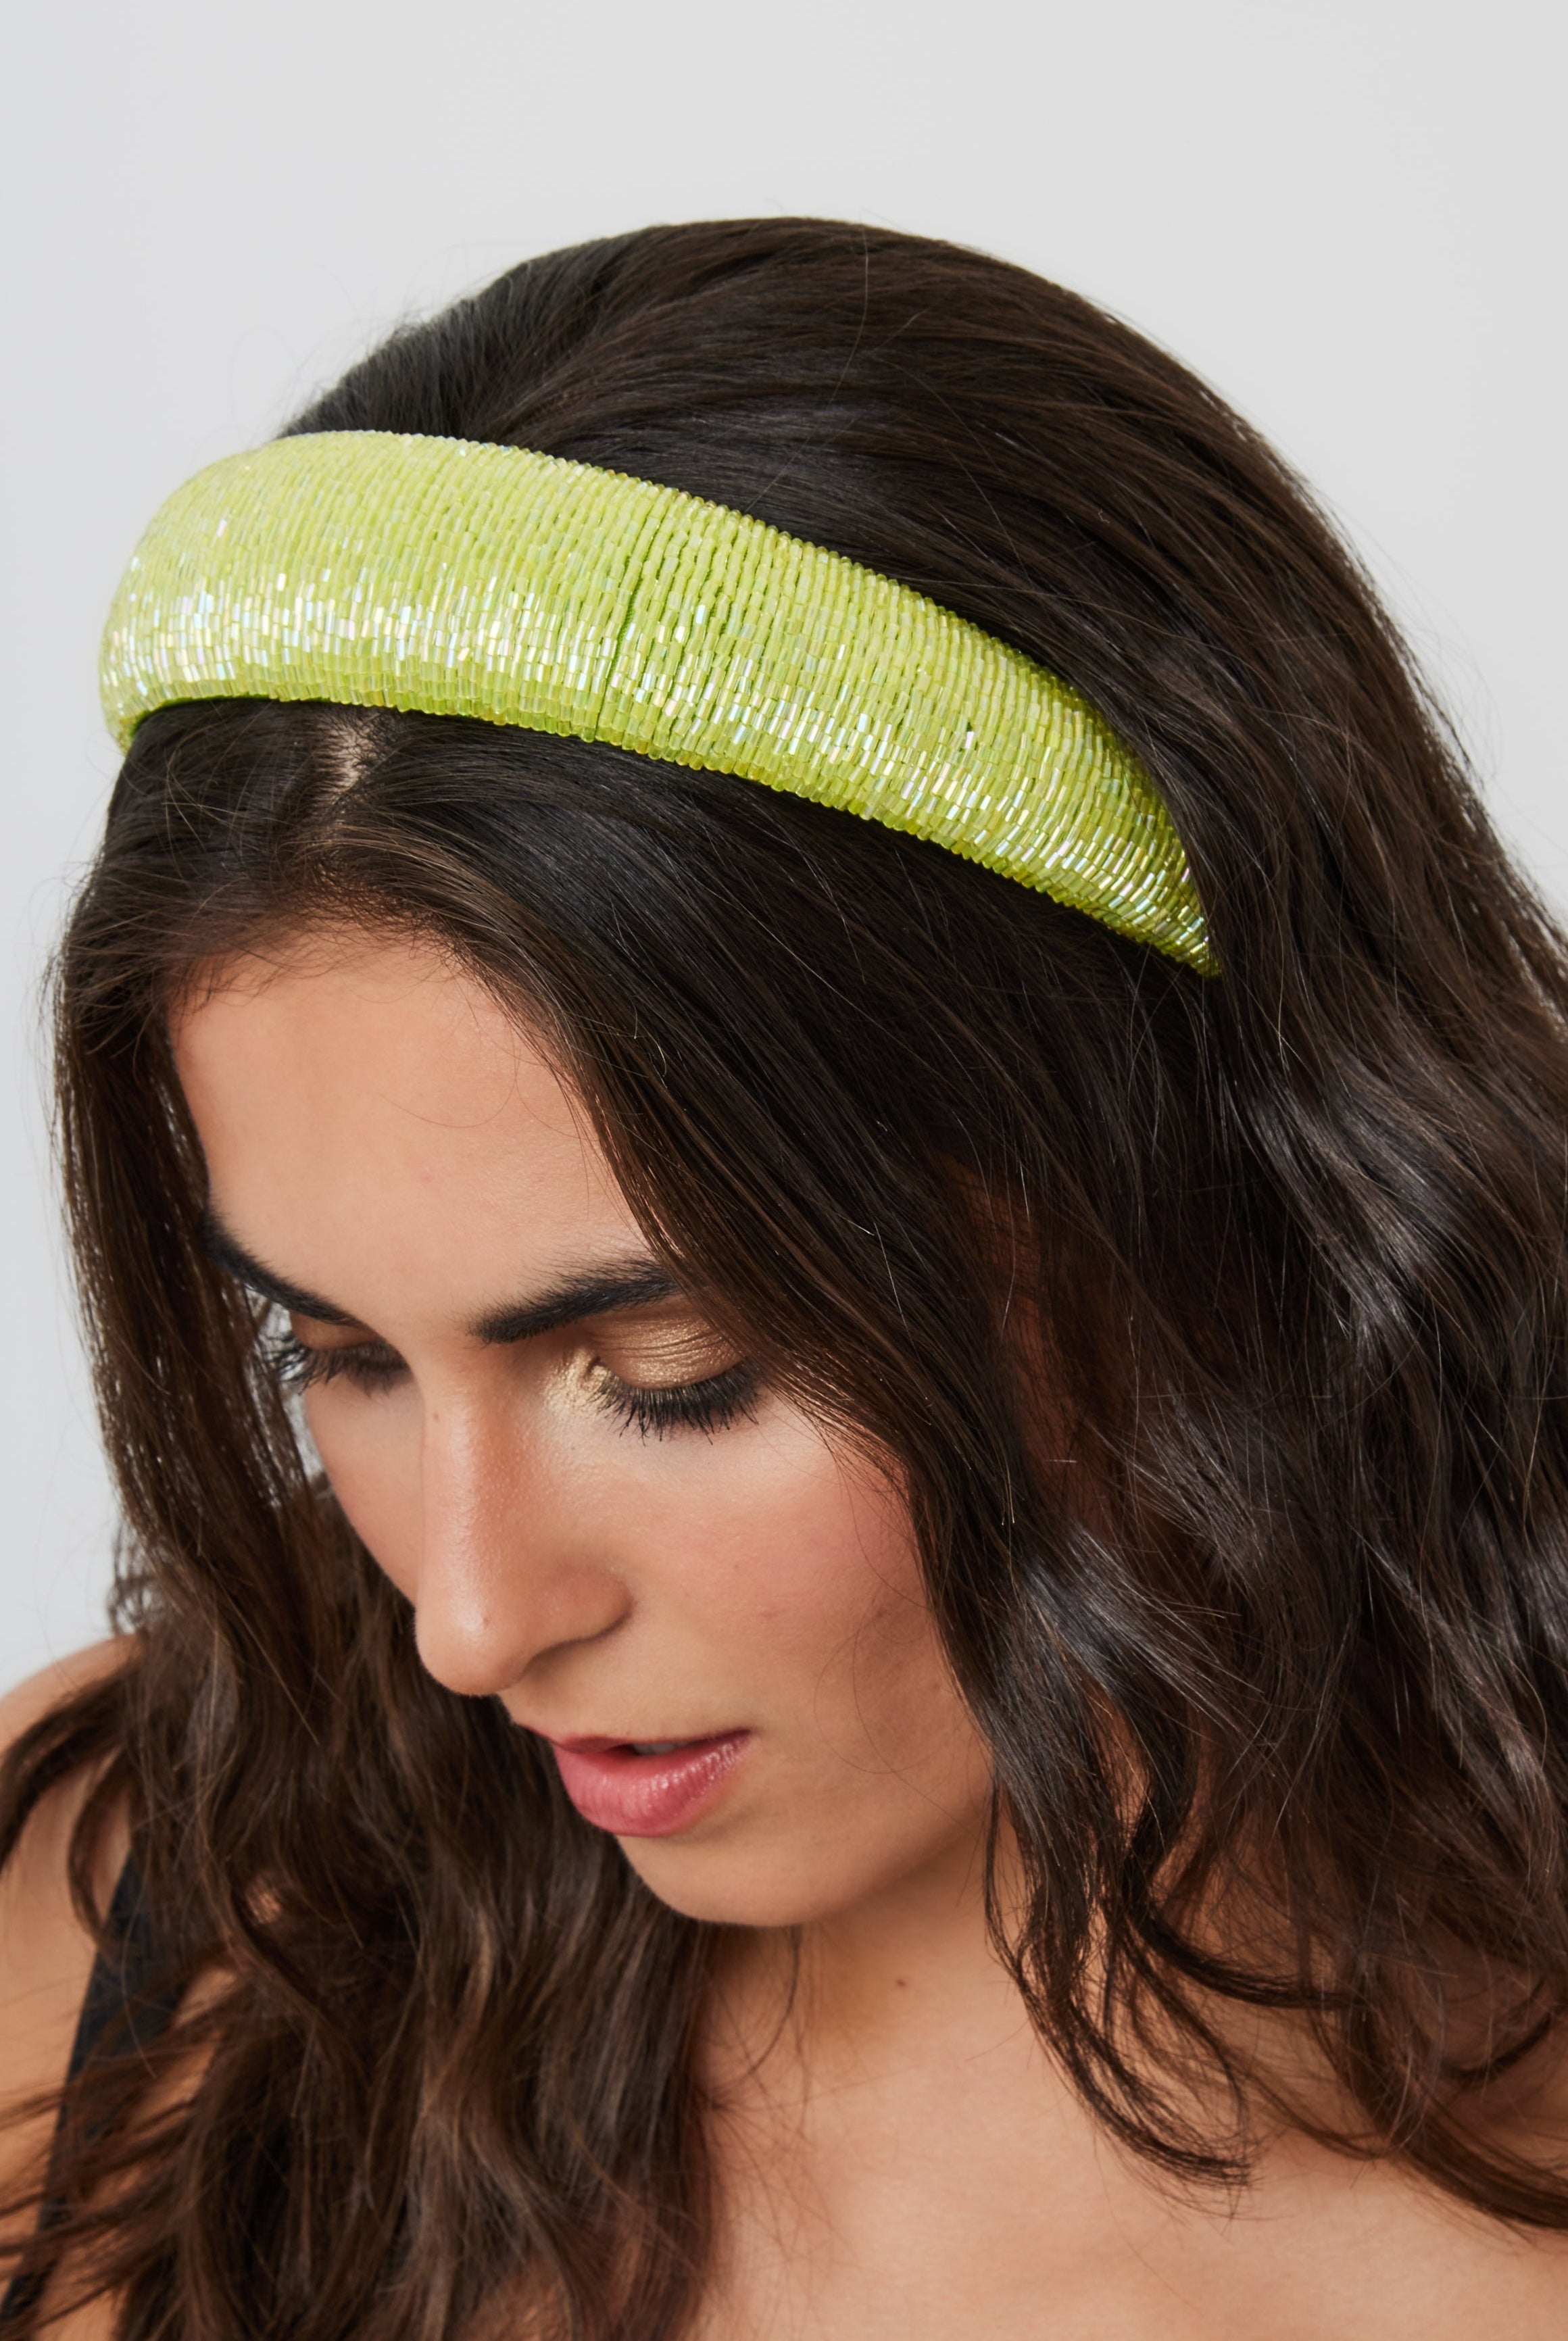 Straight Beaded Headband in Green | Embellished | Hair Accessory | Wedding | Wedding Guest | Festival | Occasion | Party | Glam | Hair Accessory | Women's Accessories | Women | Cottage | Tomato girl | Summer | Holiday | Beach